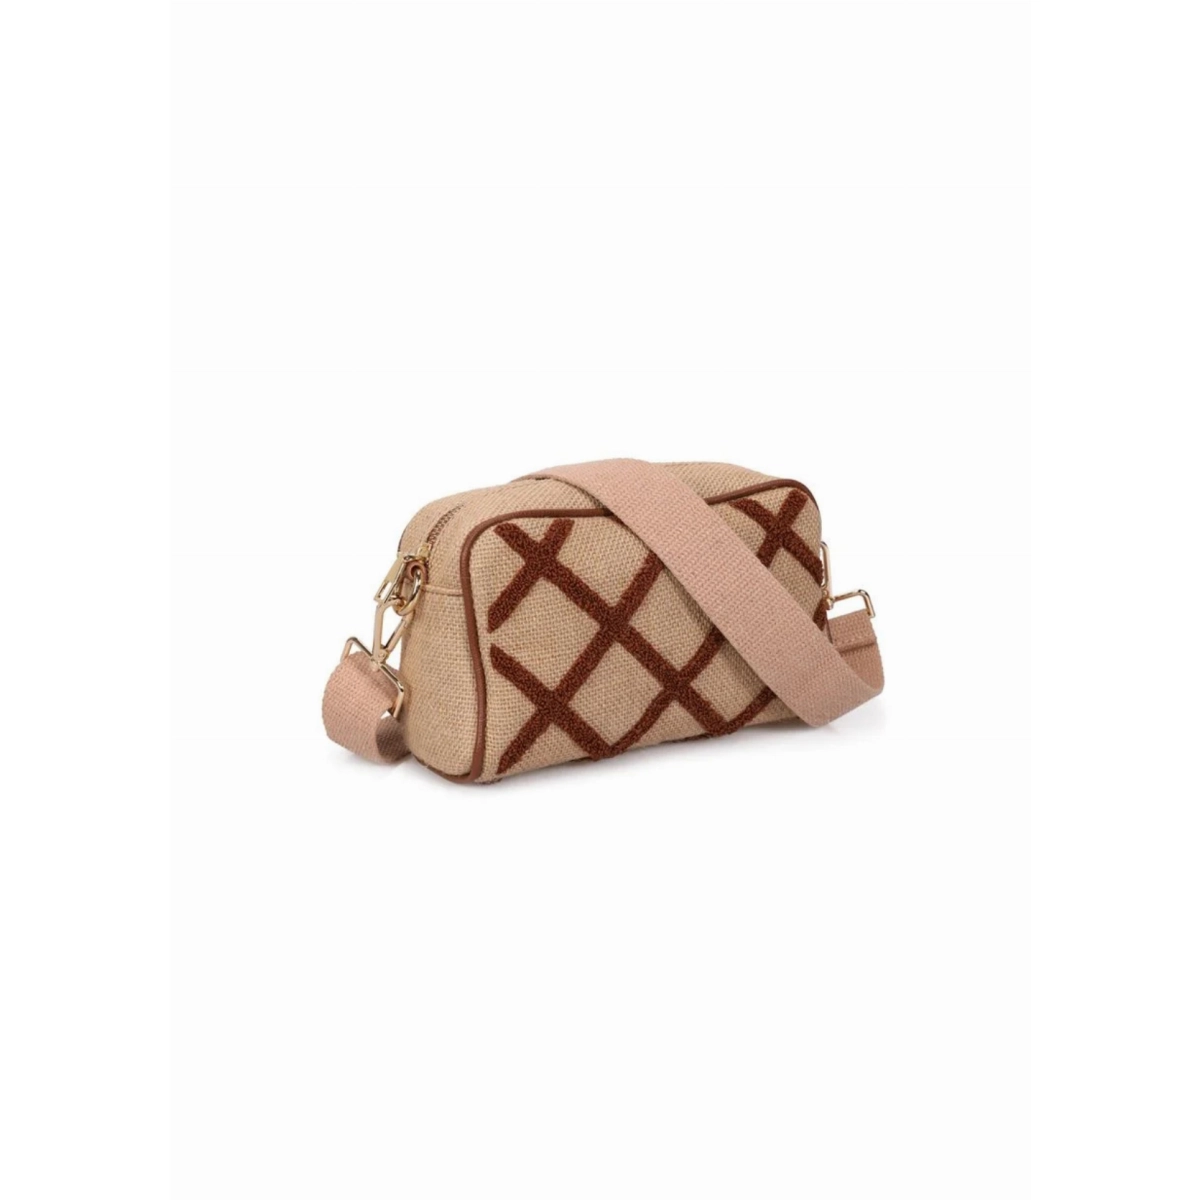 BOLSO LAURA ASHLEY LENORE-QUILTED-TAN LENOREQUILETN